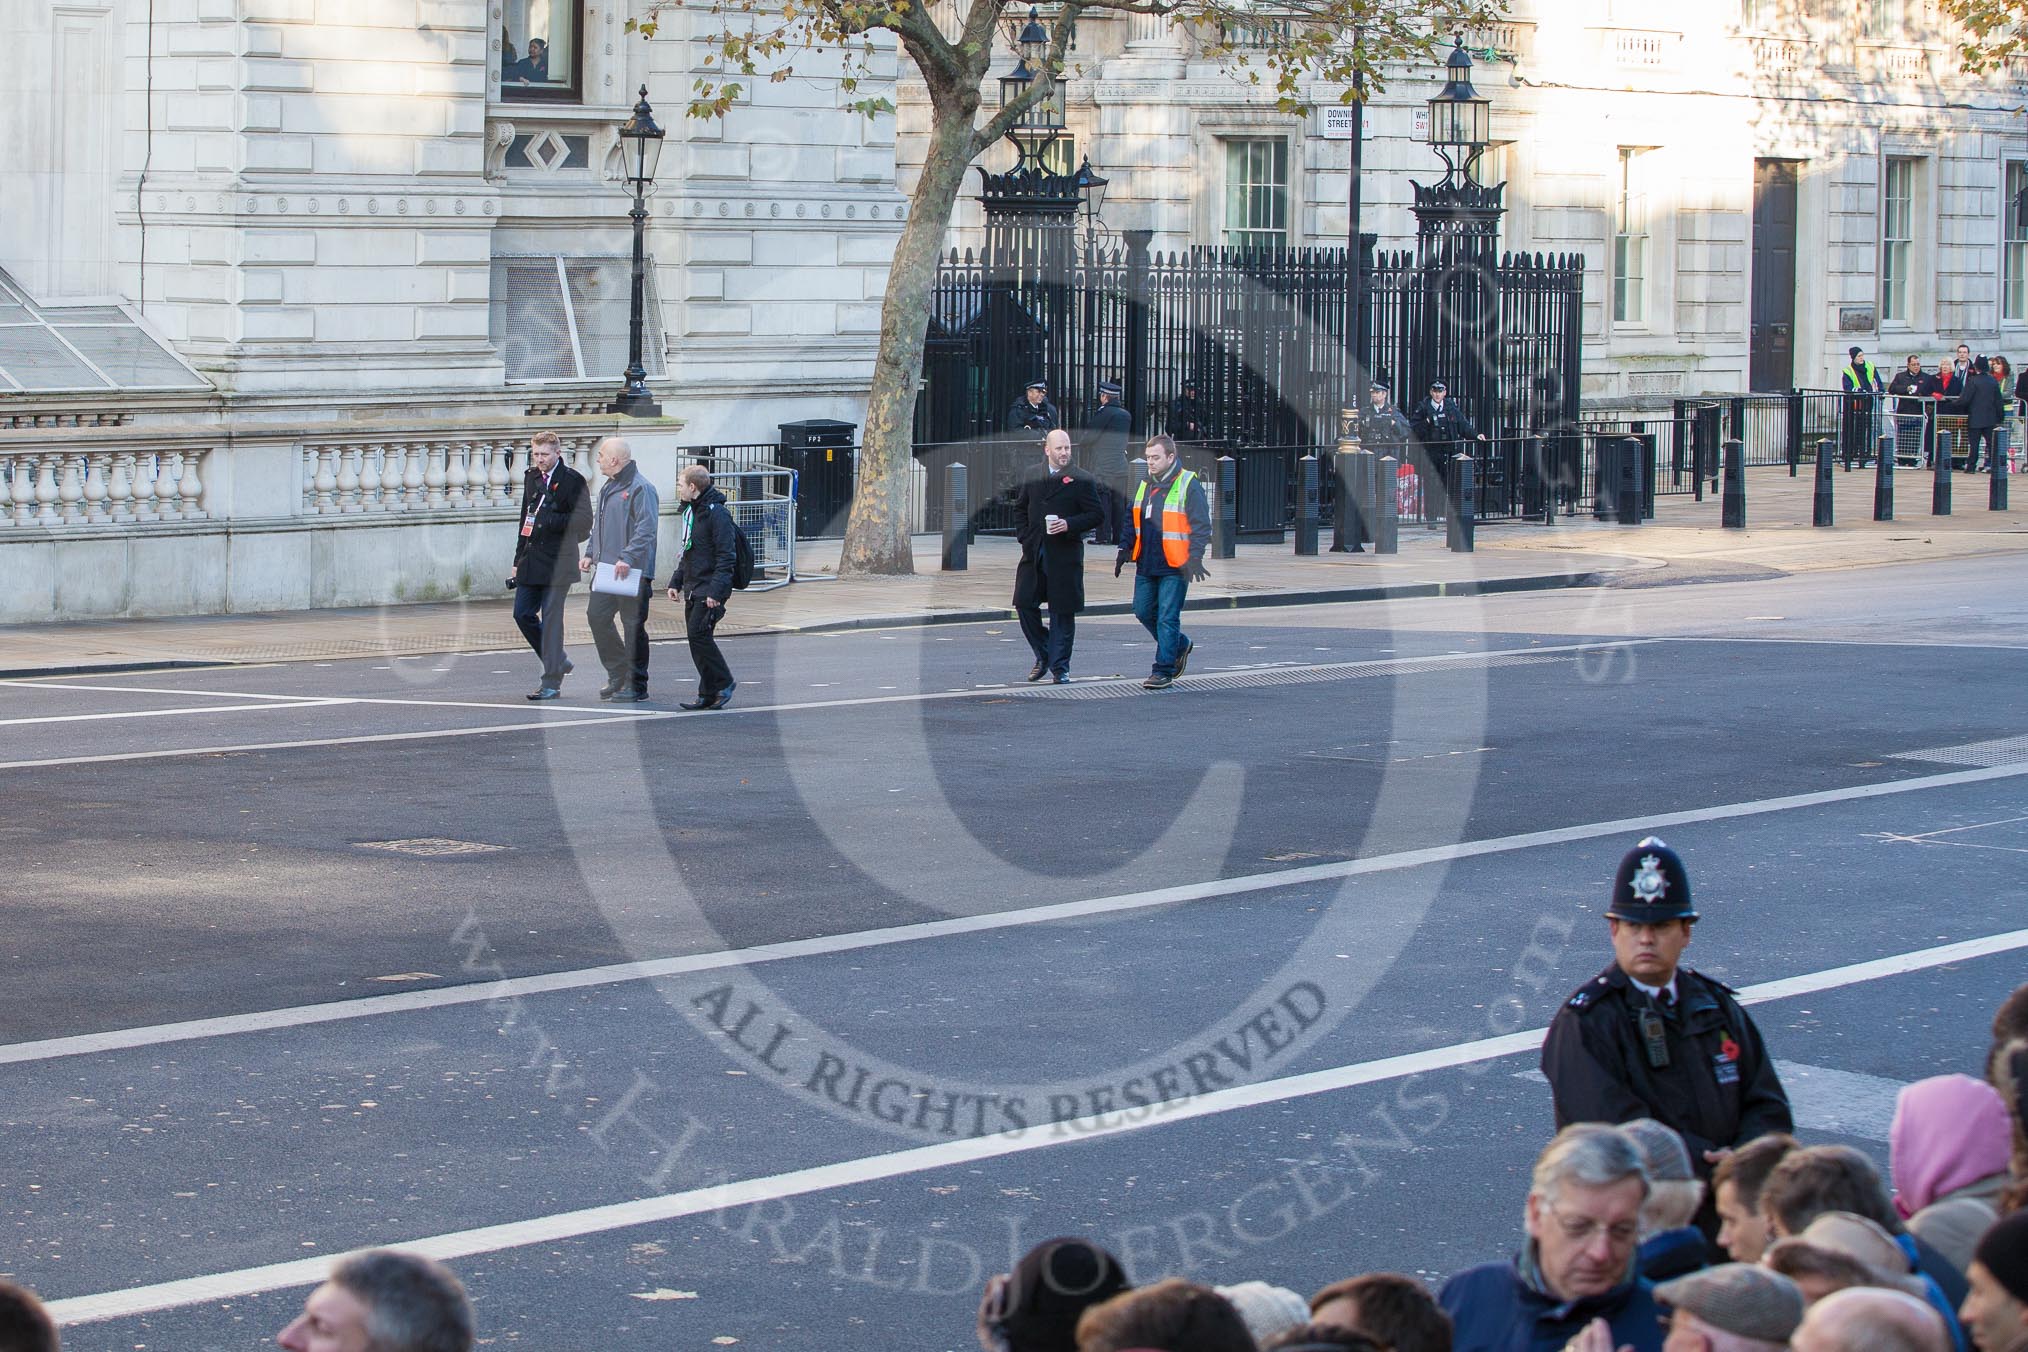 Whitehall, and the southern entrance gate to Downing Street, in the morning of Remembrance Sunday.